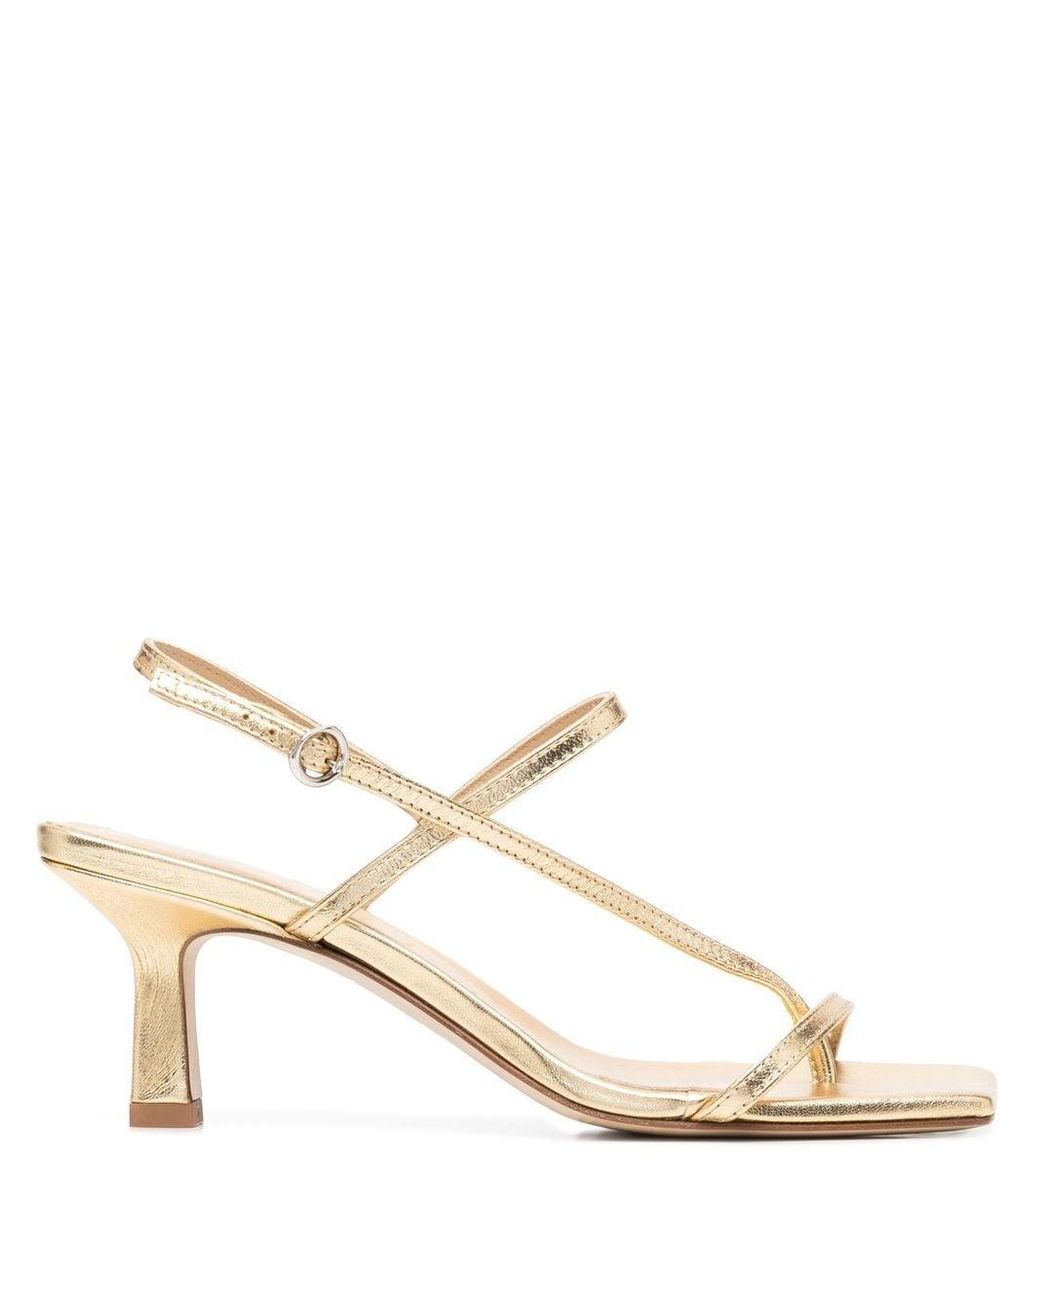 Aeyde Leather Elise 70mm Sandals in Gold (Metallic) | Lyst UK